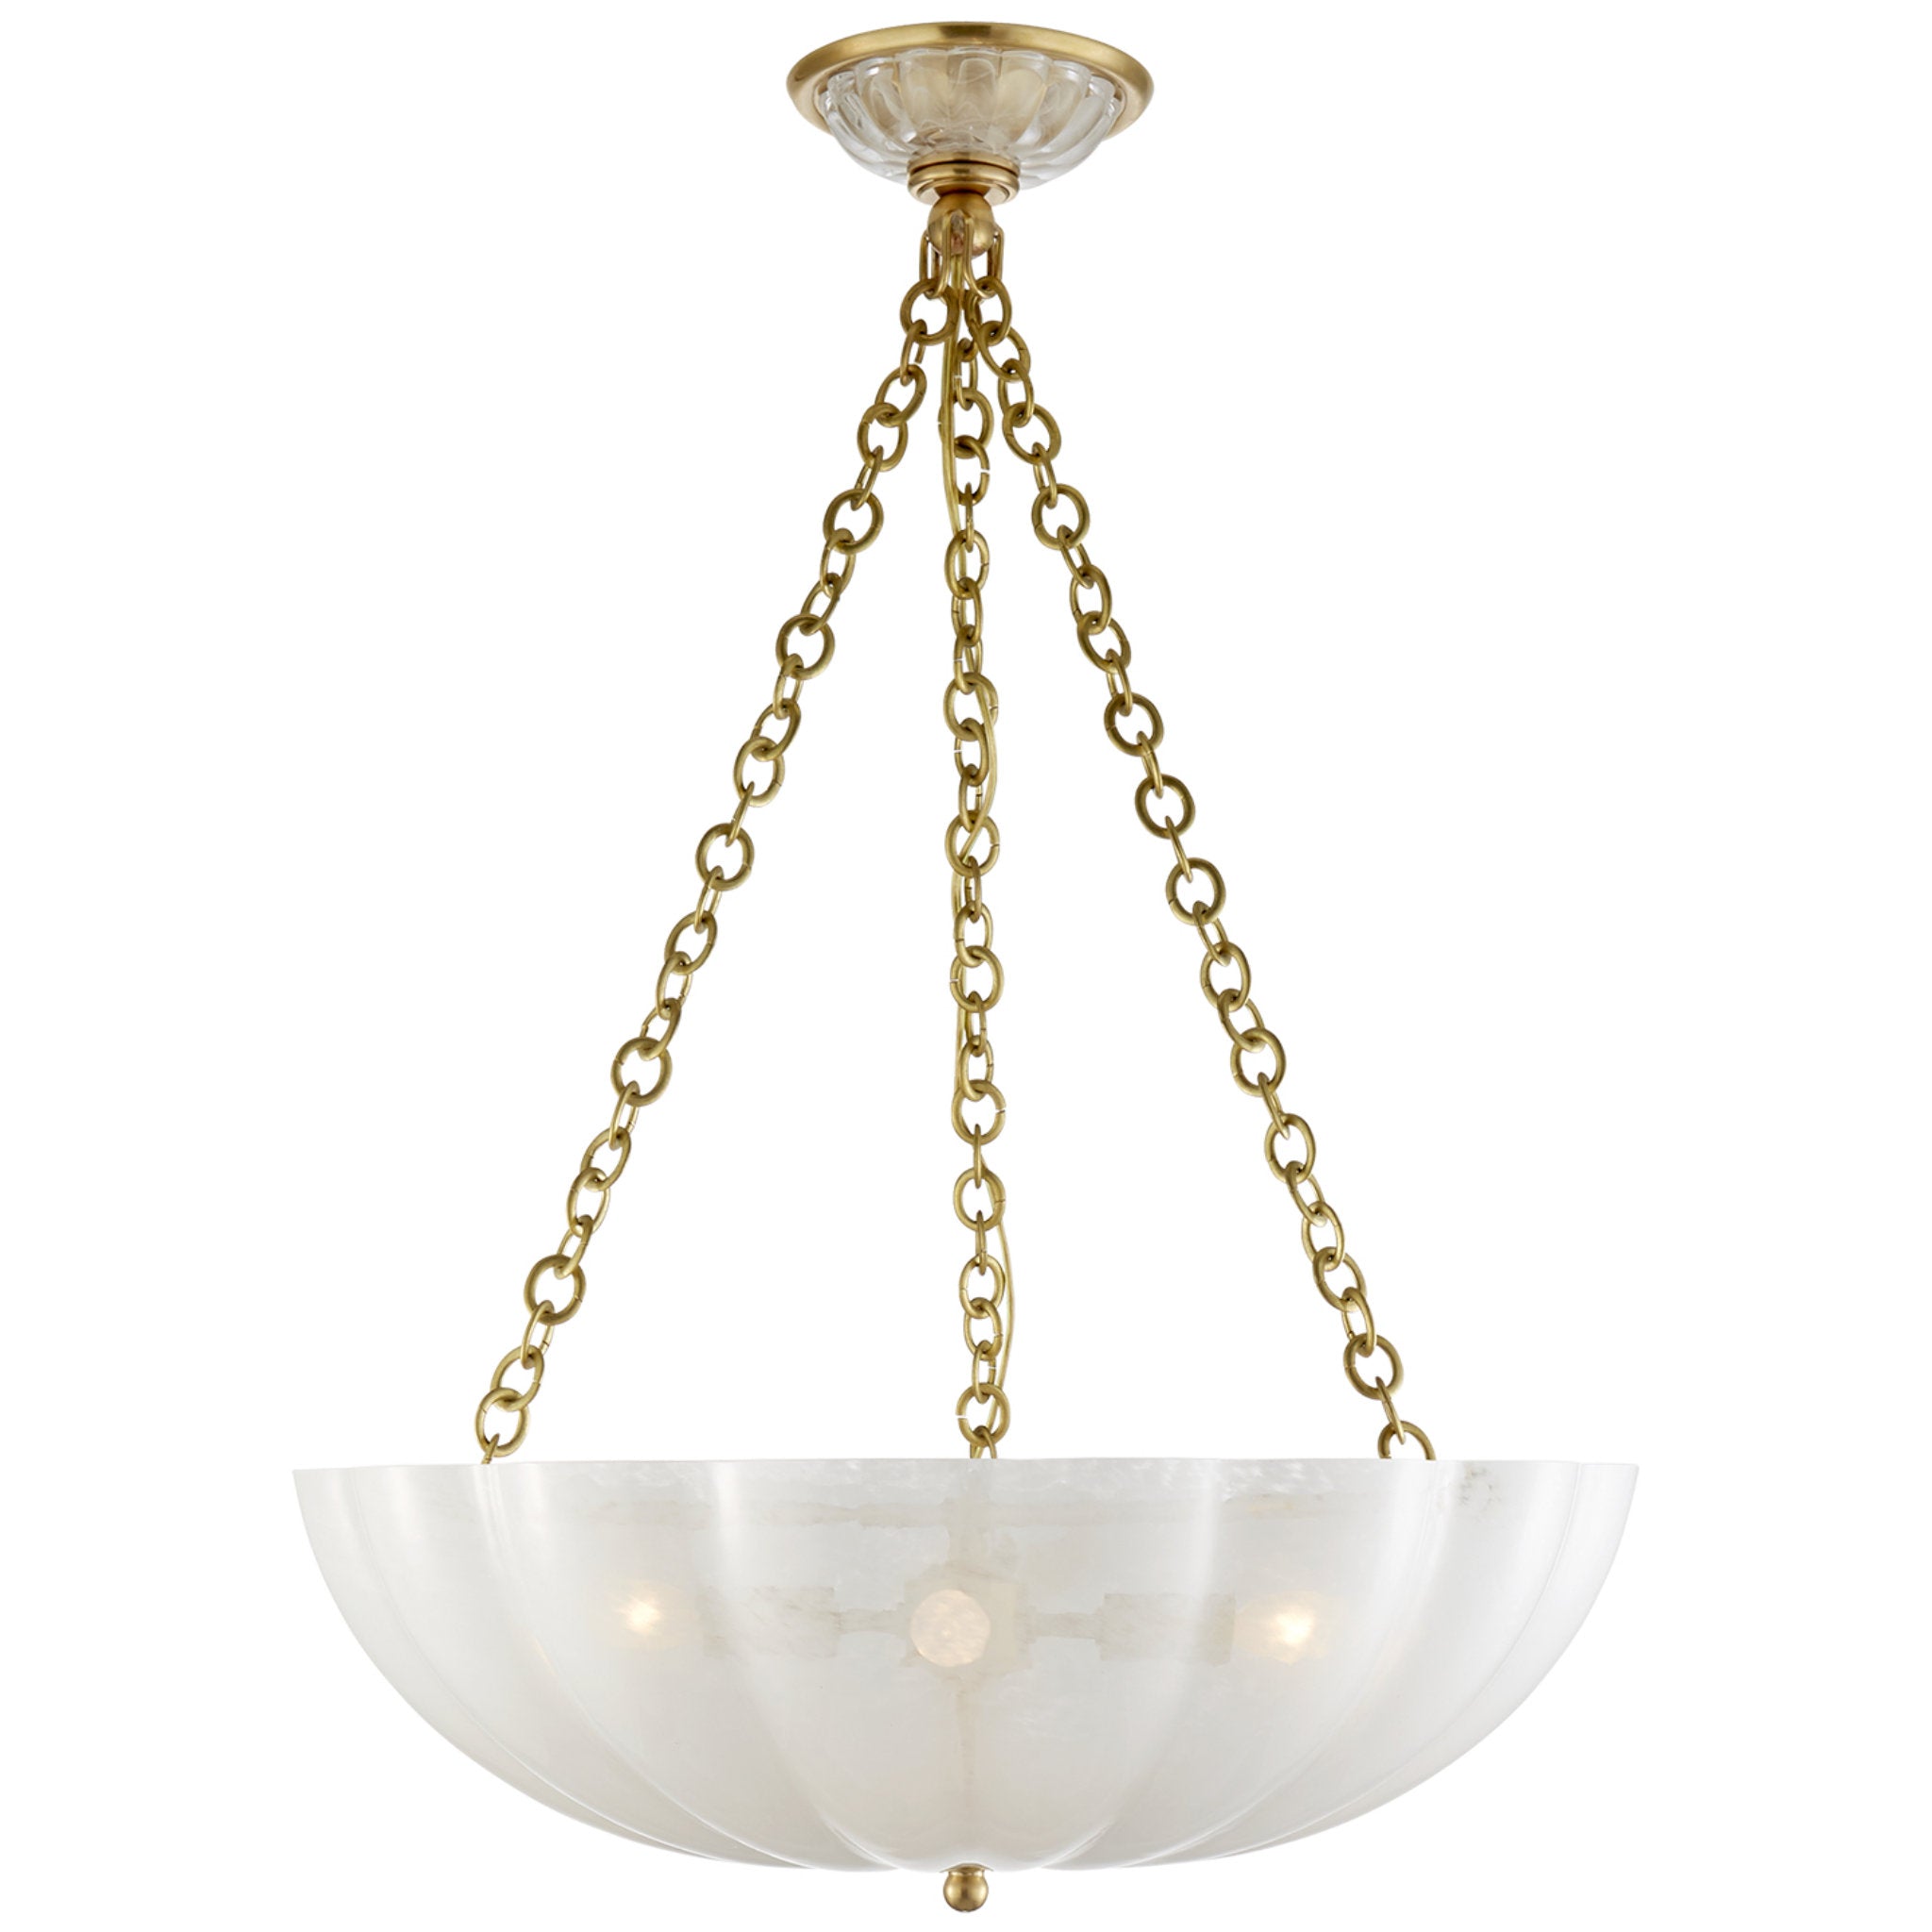 AERIN Rosehill Large Chandelier in Hand-Rubbed Antique Brass with Strie Glass